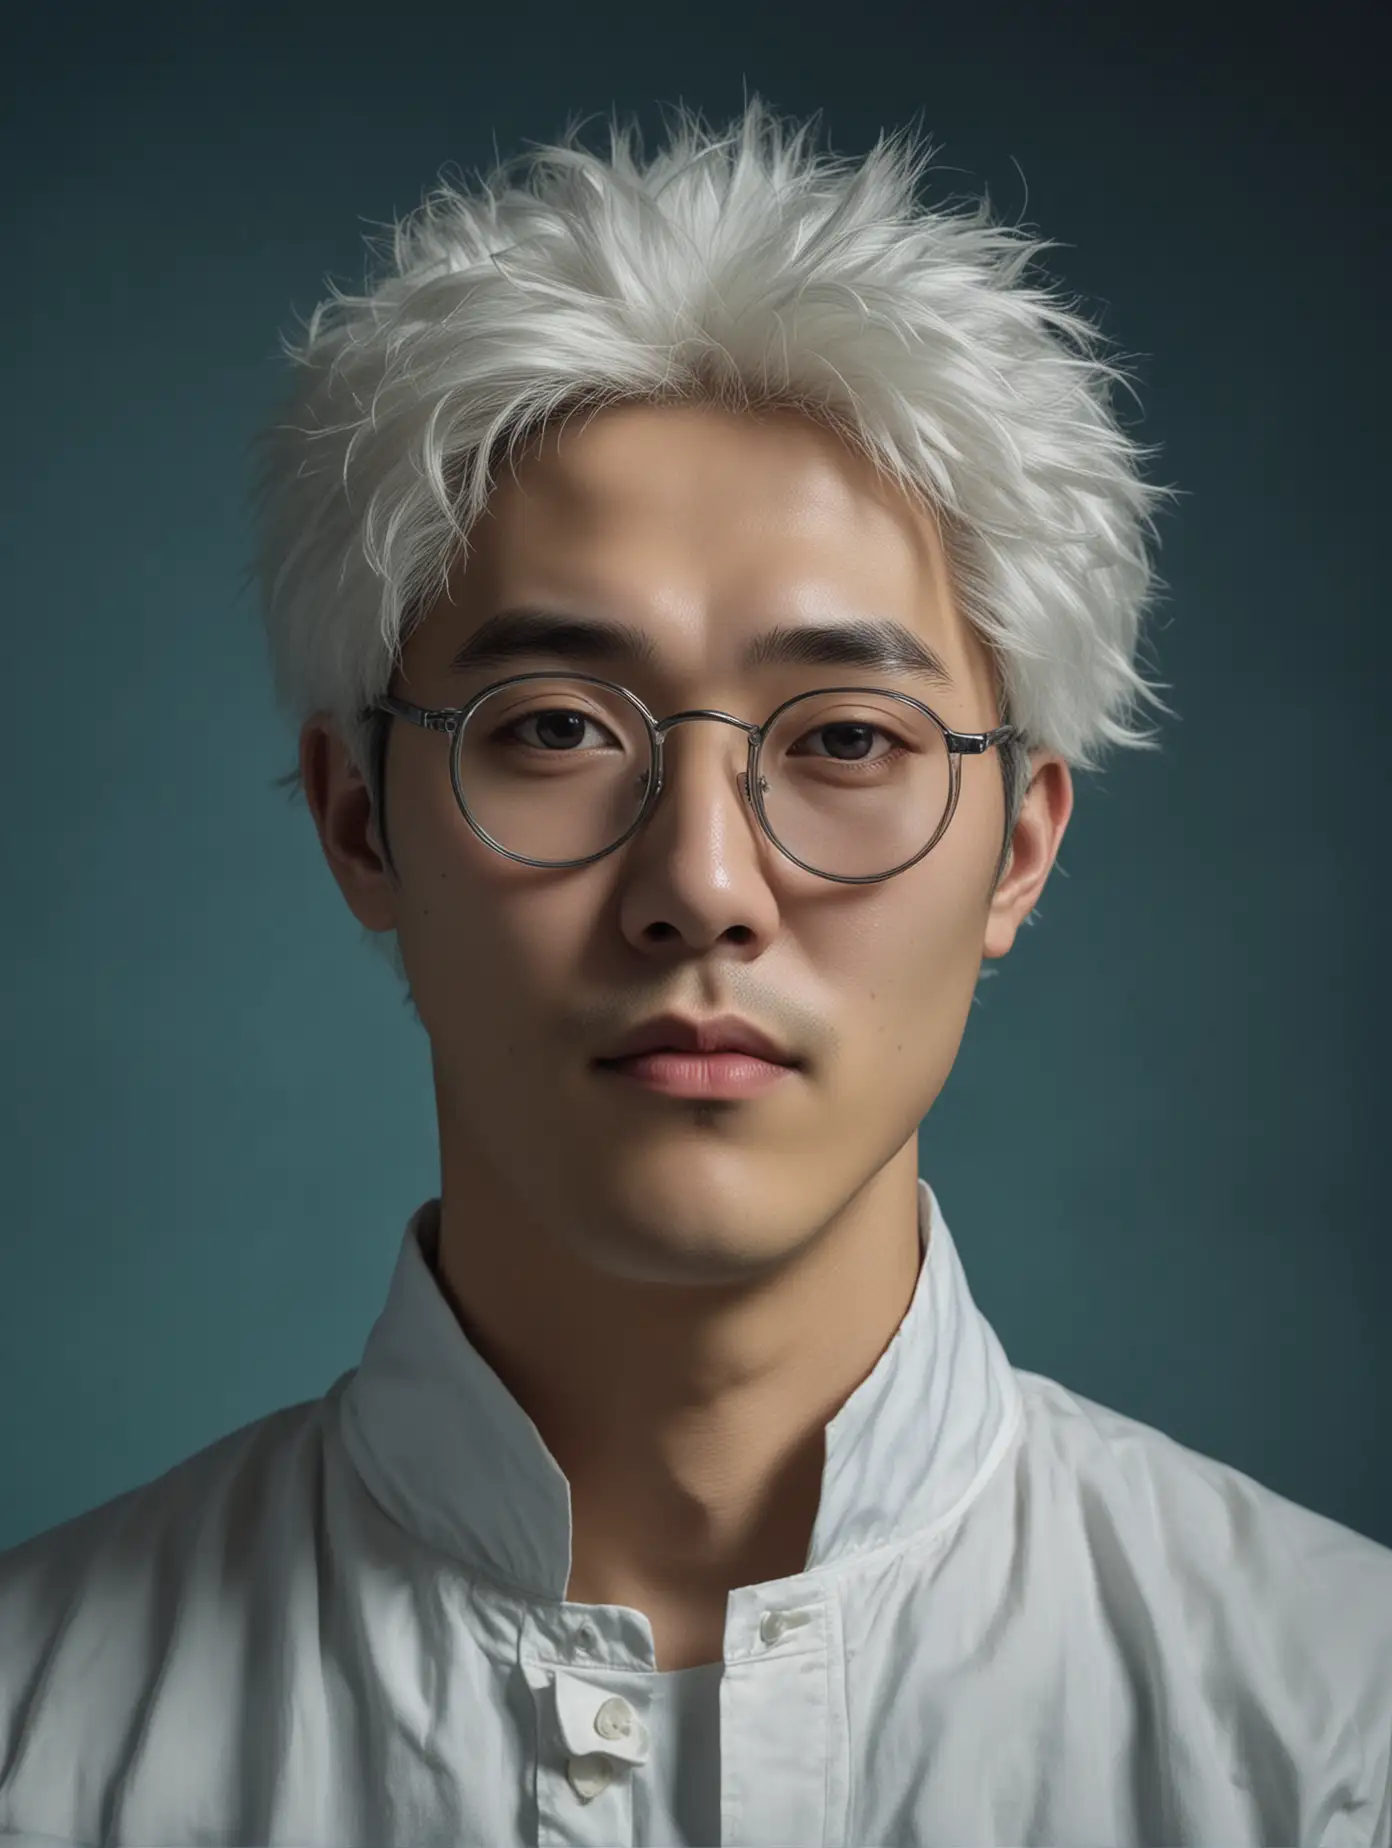 White hair, a Korean man, 180cm tall, wearing analog glasses, a man in his 20s, growing up in a lab, desperately trying to save his grace after his death, with an open-minded personality, secretive, full of longing, cold-hearted personality, cool-headed and cynical ((Rembrandt's style), handsome, blue background